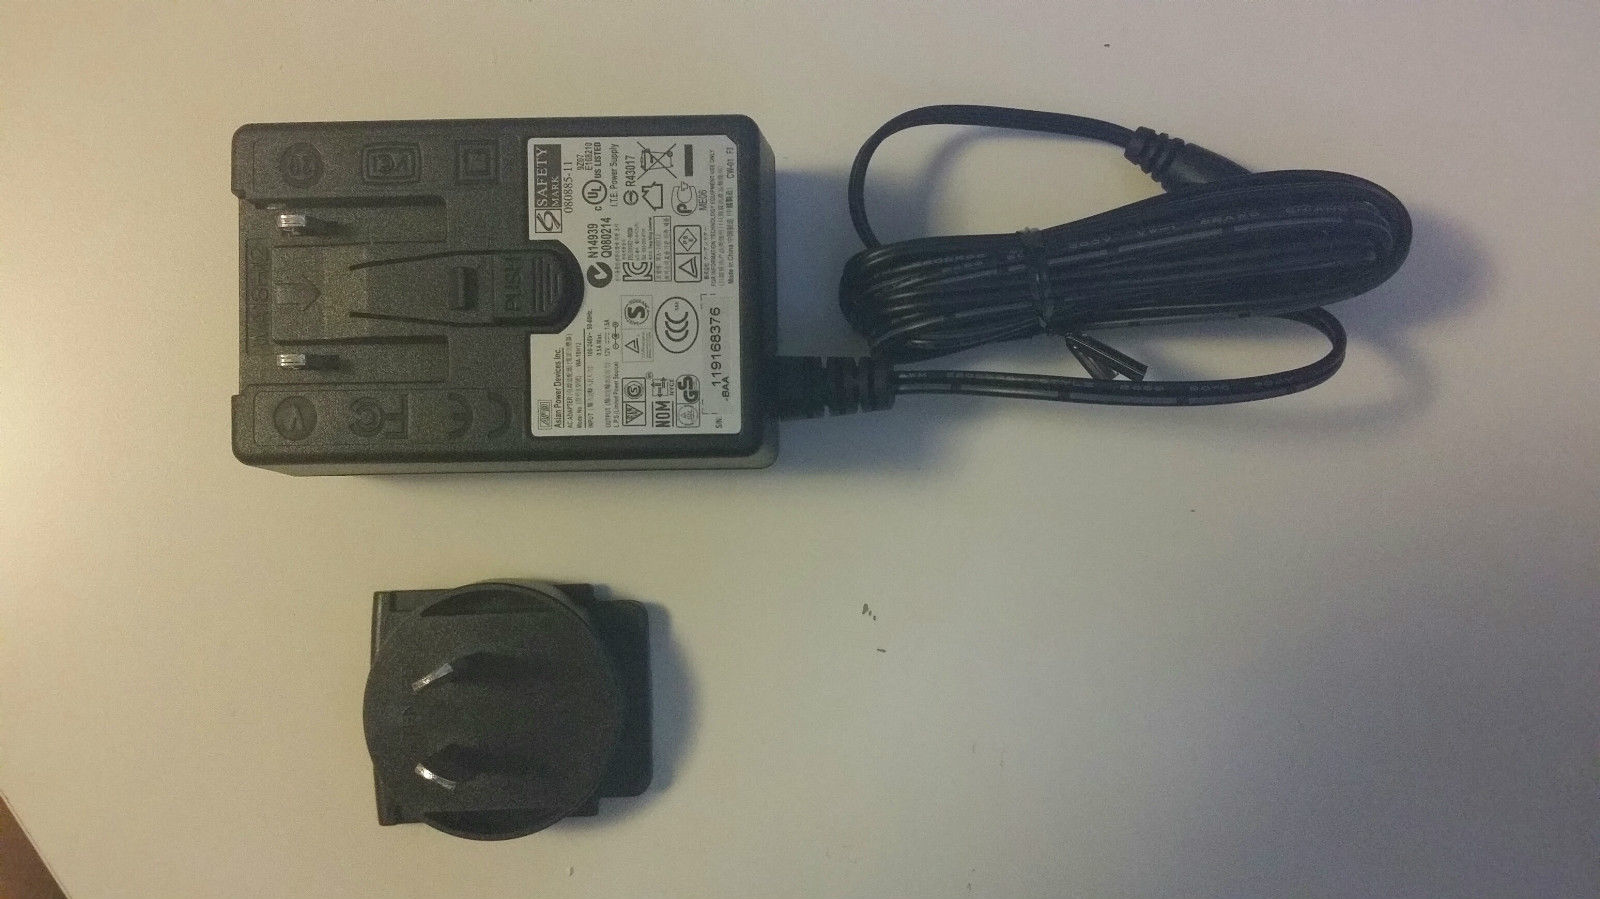 GENUINE APD WA-18H12 12V 1.5A AC ADAPTER for SEAGATE 3.5" EXTERNAL HARD DRIVE POWER SUPPLY 5.5*2.5M